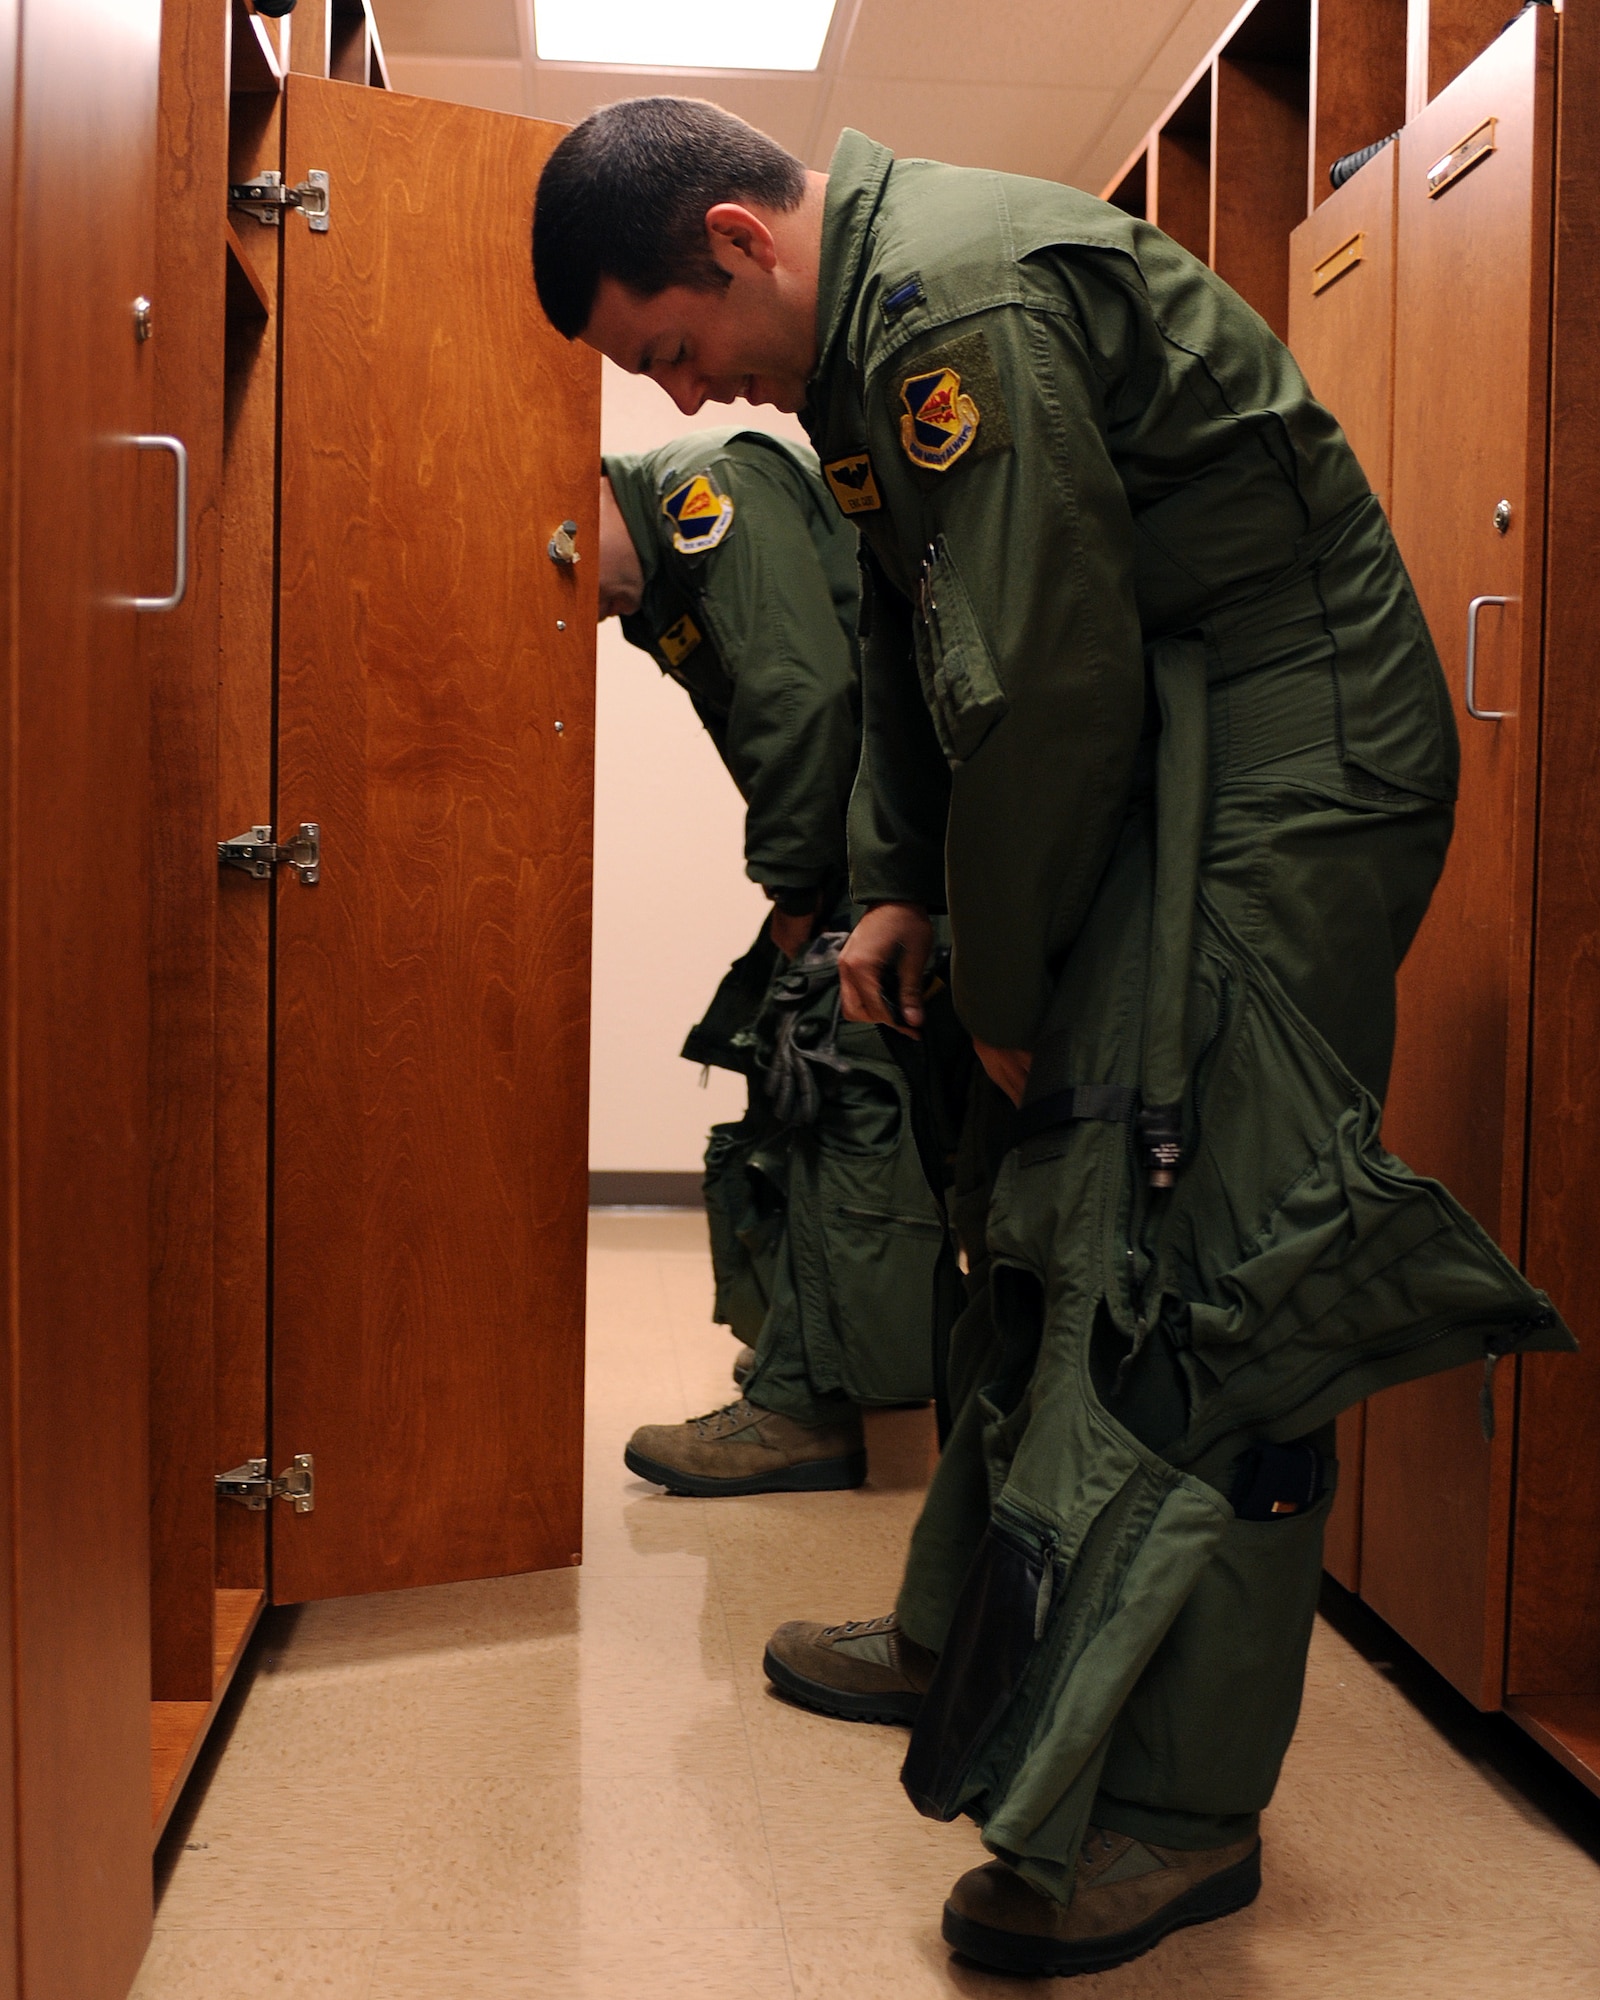 U.S. Air Force 1st Lt. Eric Calvey, 357th Fighter Squadron, suits up prior to leaving for the flightline on Davis-Monthan Air Force Base, Ariz., Nov. 7, 2012. The 357th FS student pilot training takes six months to complete.(U.S. Air Force photo by Airman 1st Class Christine Griffiths/Released) 